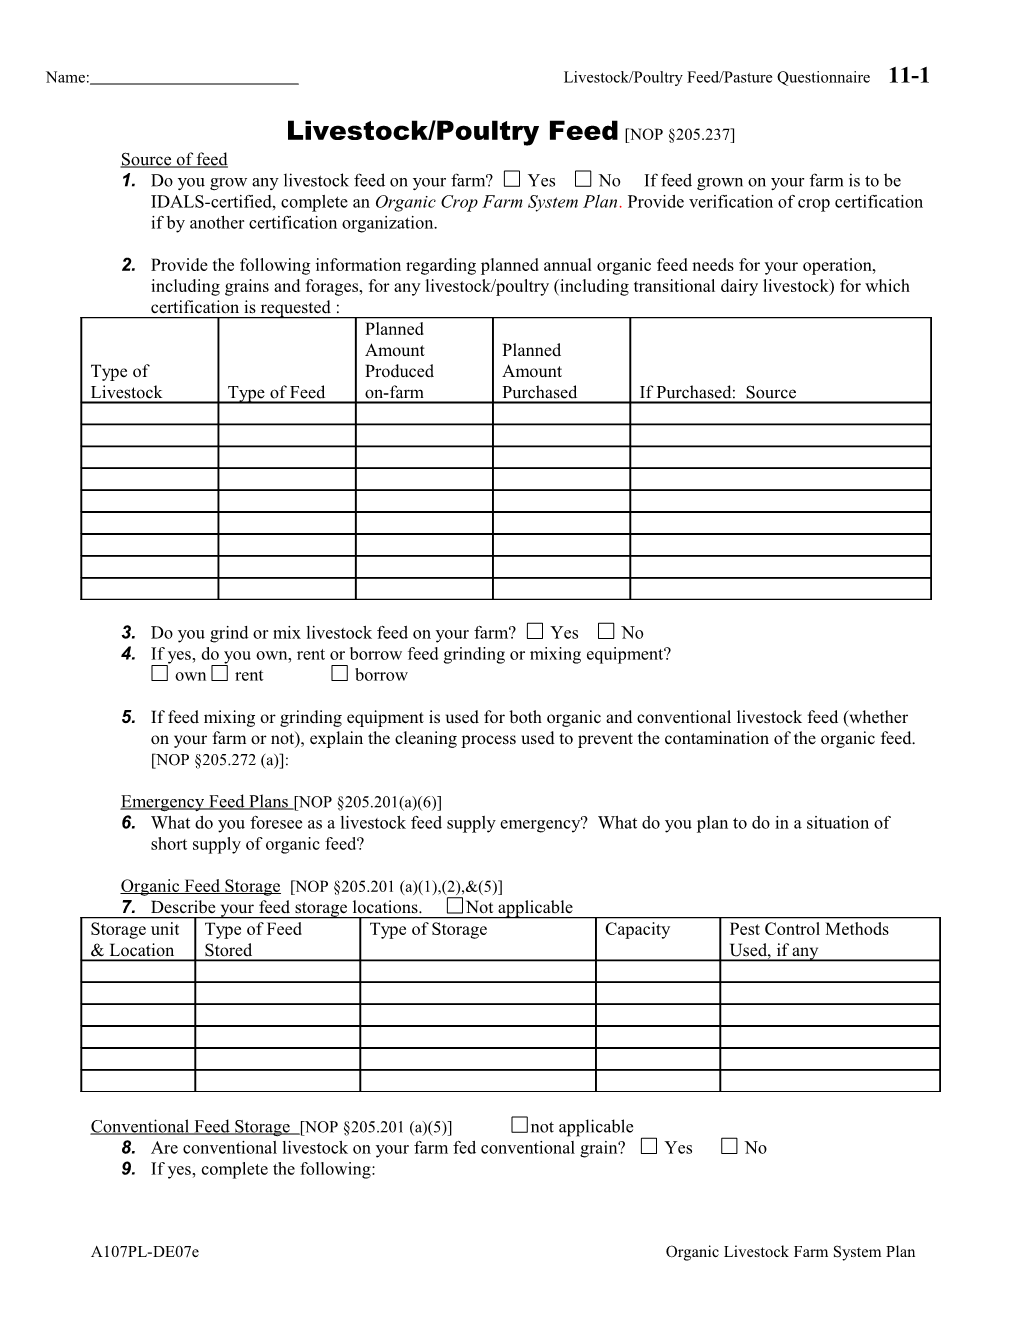 Name: Livestock/Poultry Feed/Pasture Questionnaire 11-1